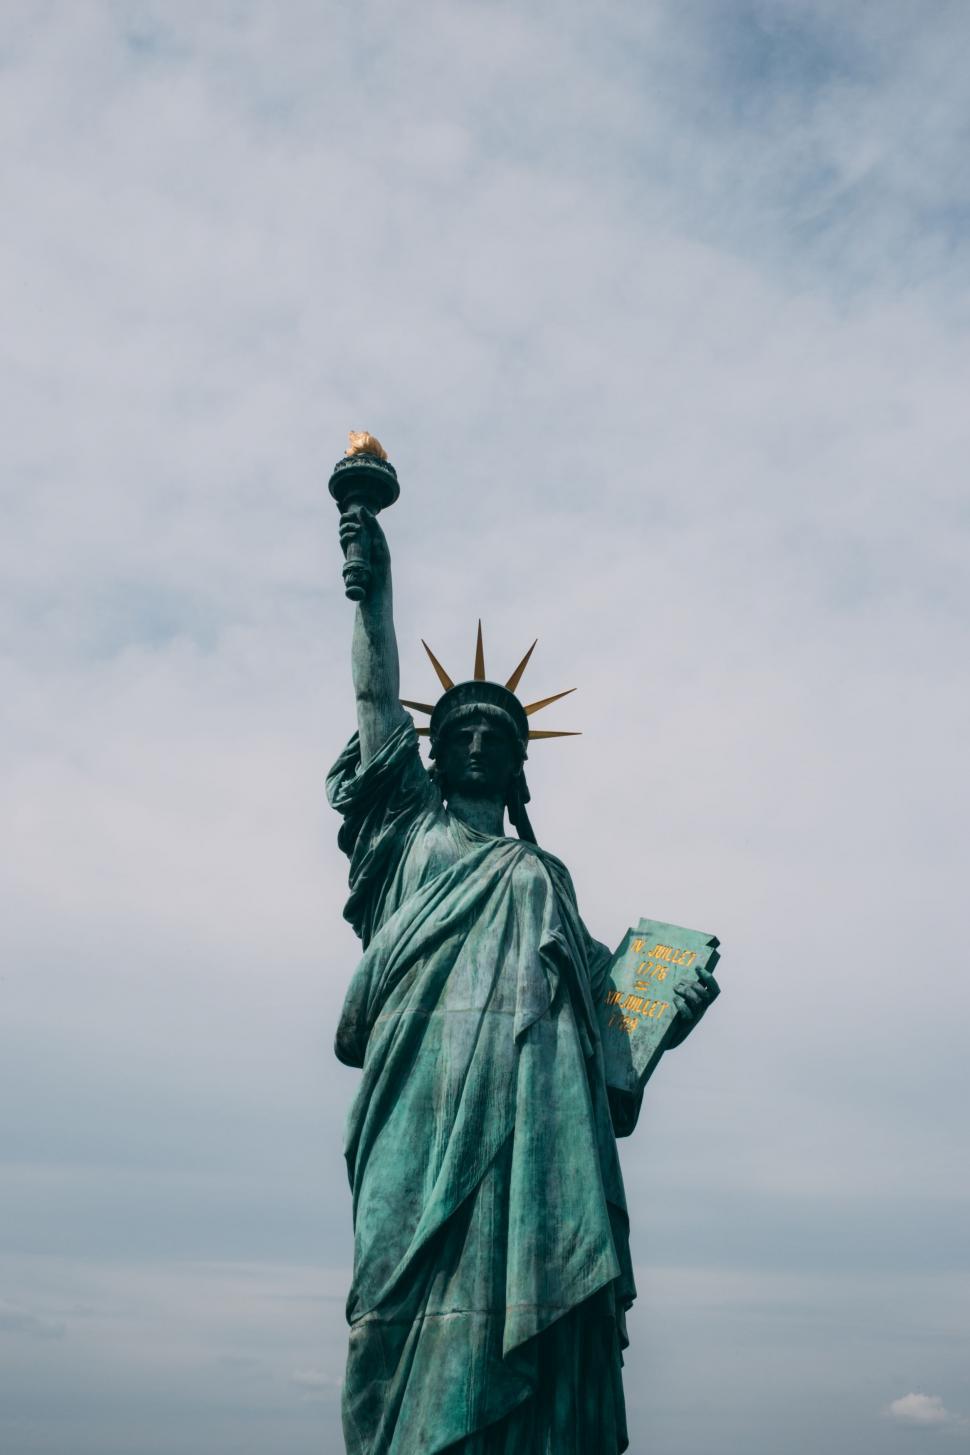 Free Image of Statue of Liberty  